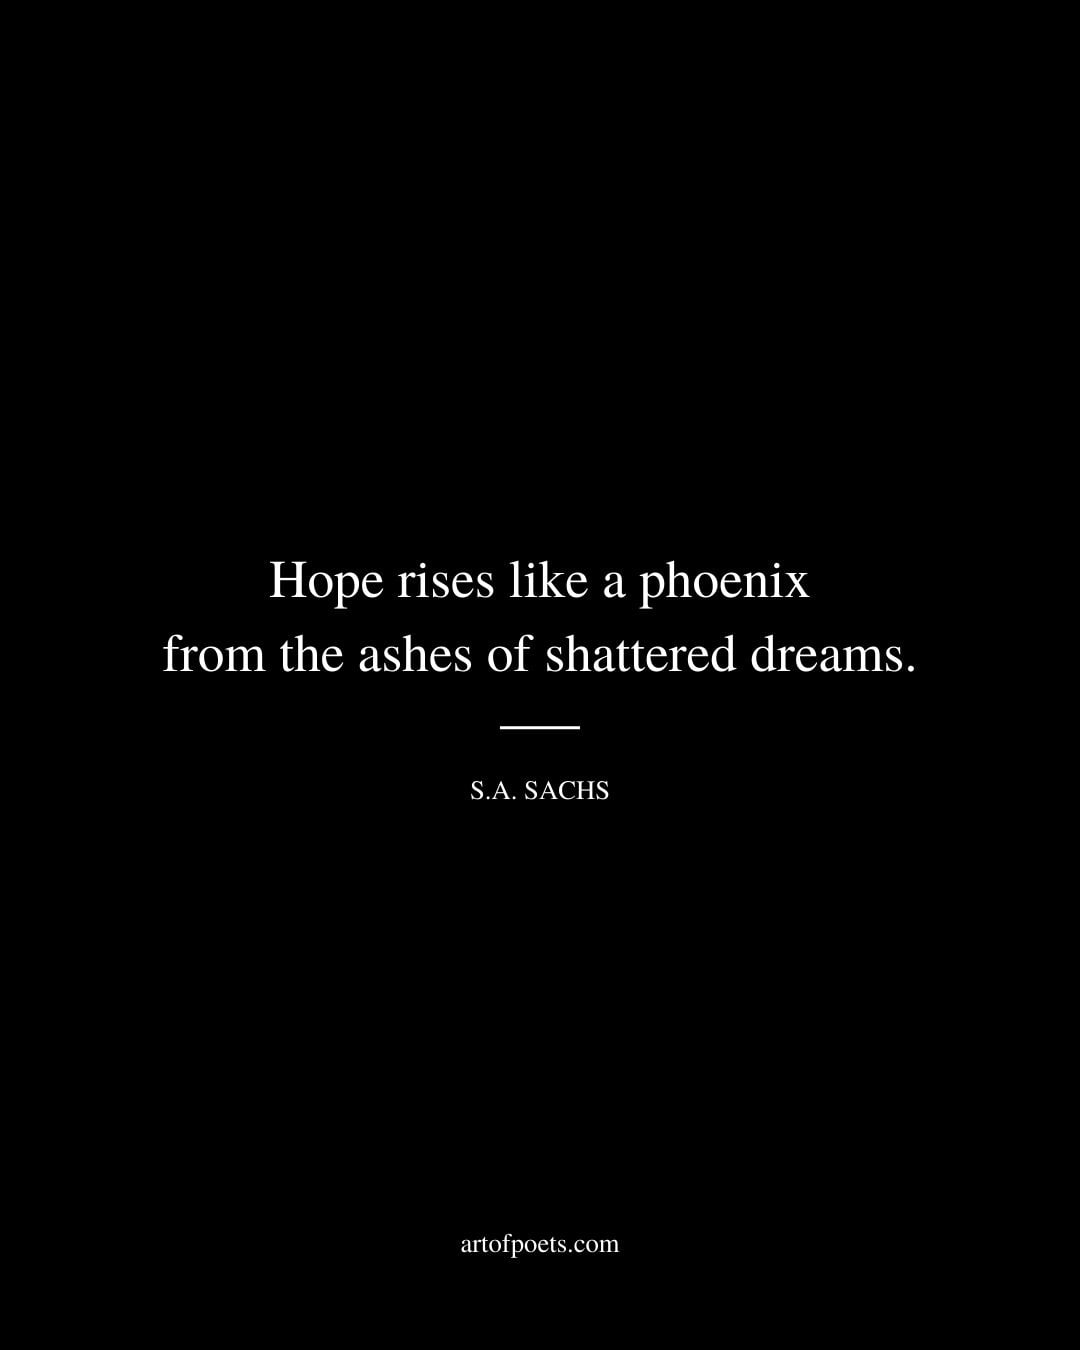 Hope rises like a phoenix from the ashes of shattered dreams. S.A. Sachs